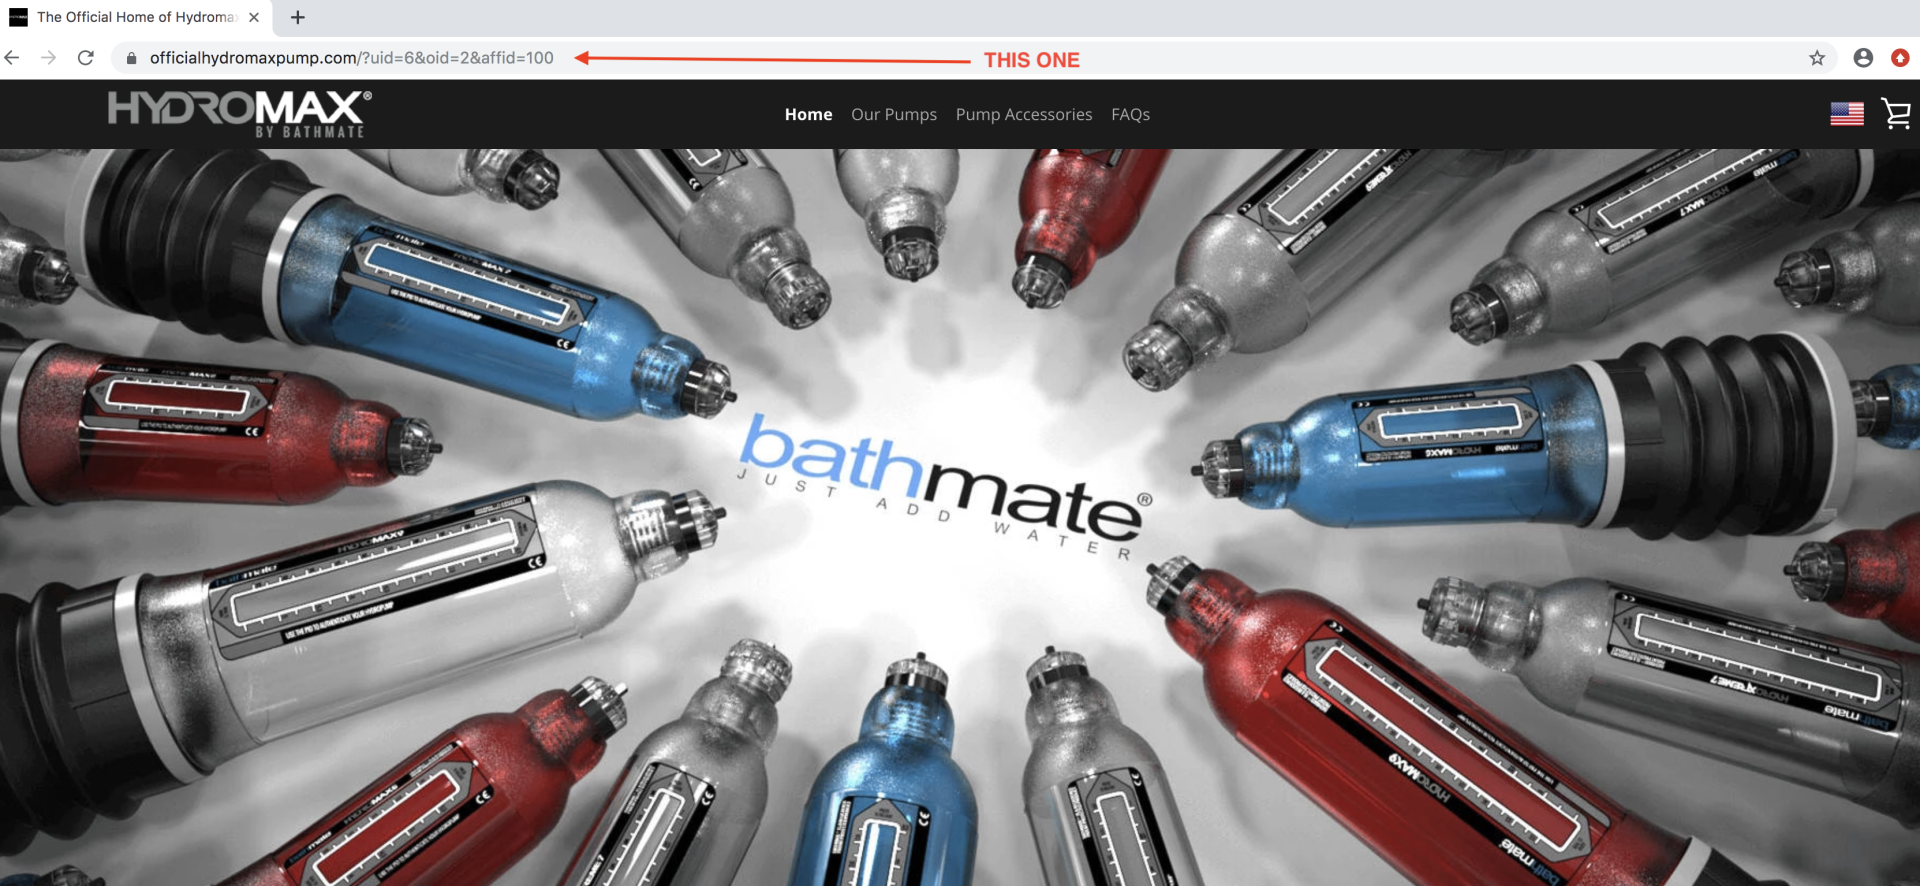 Bathmate Discount Coupon Code - 2021 Monthly Coupons & Promo